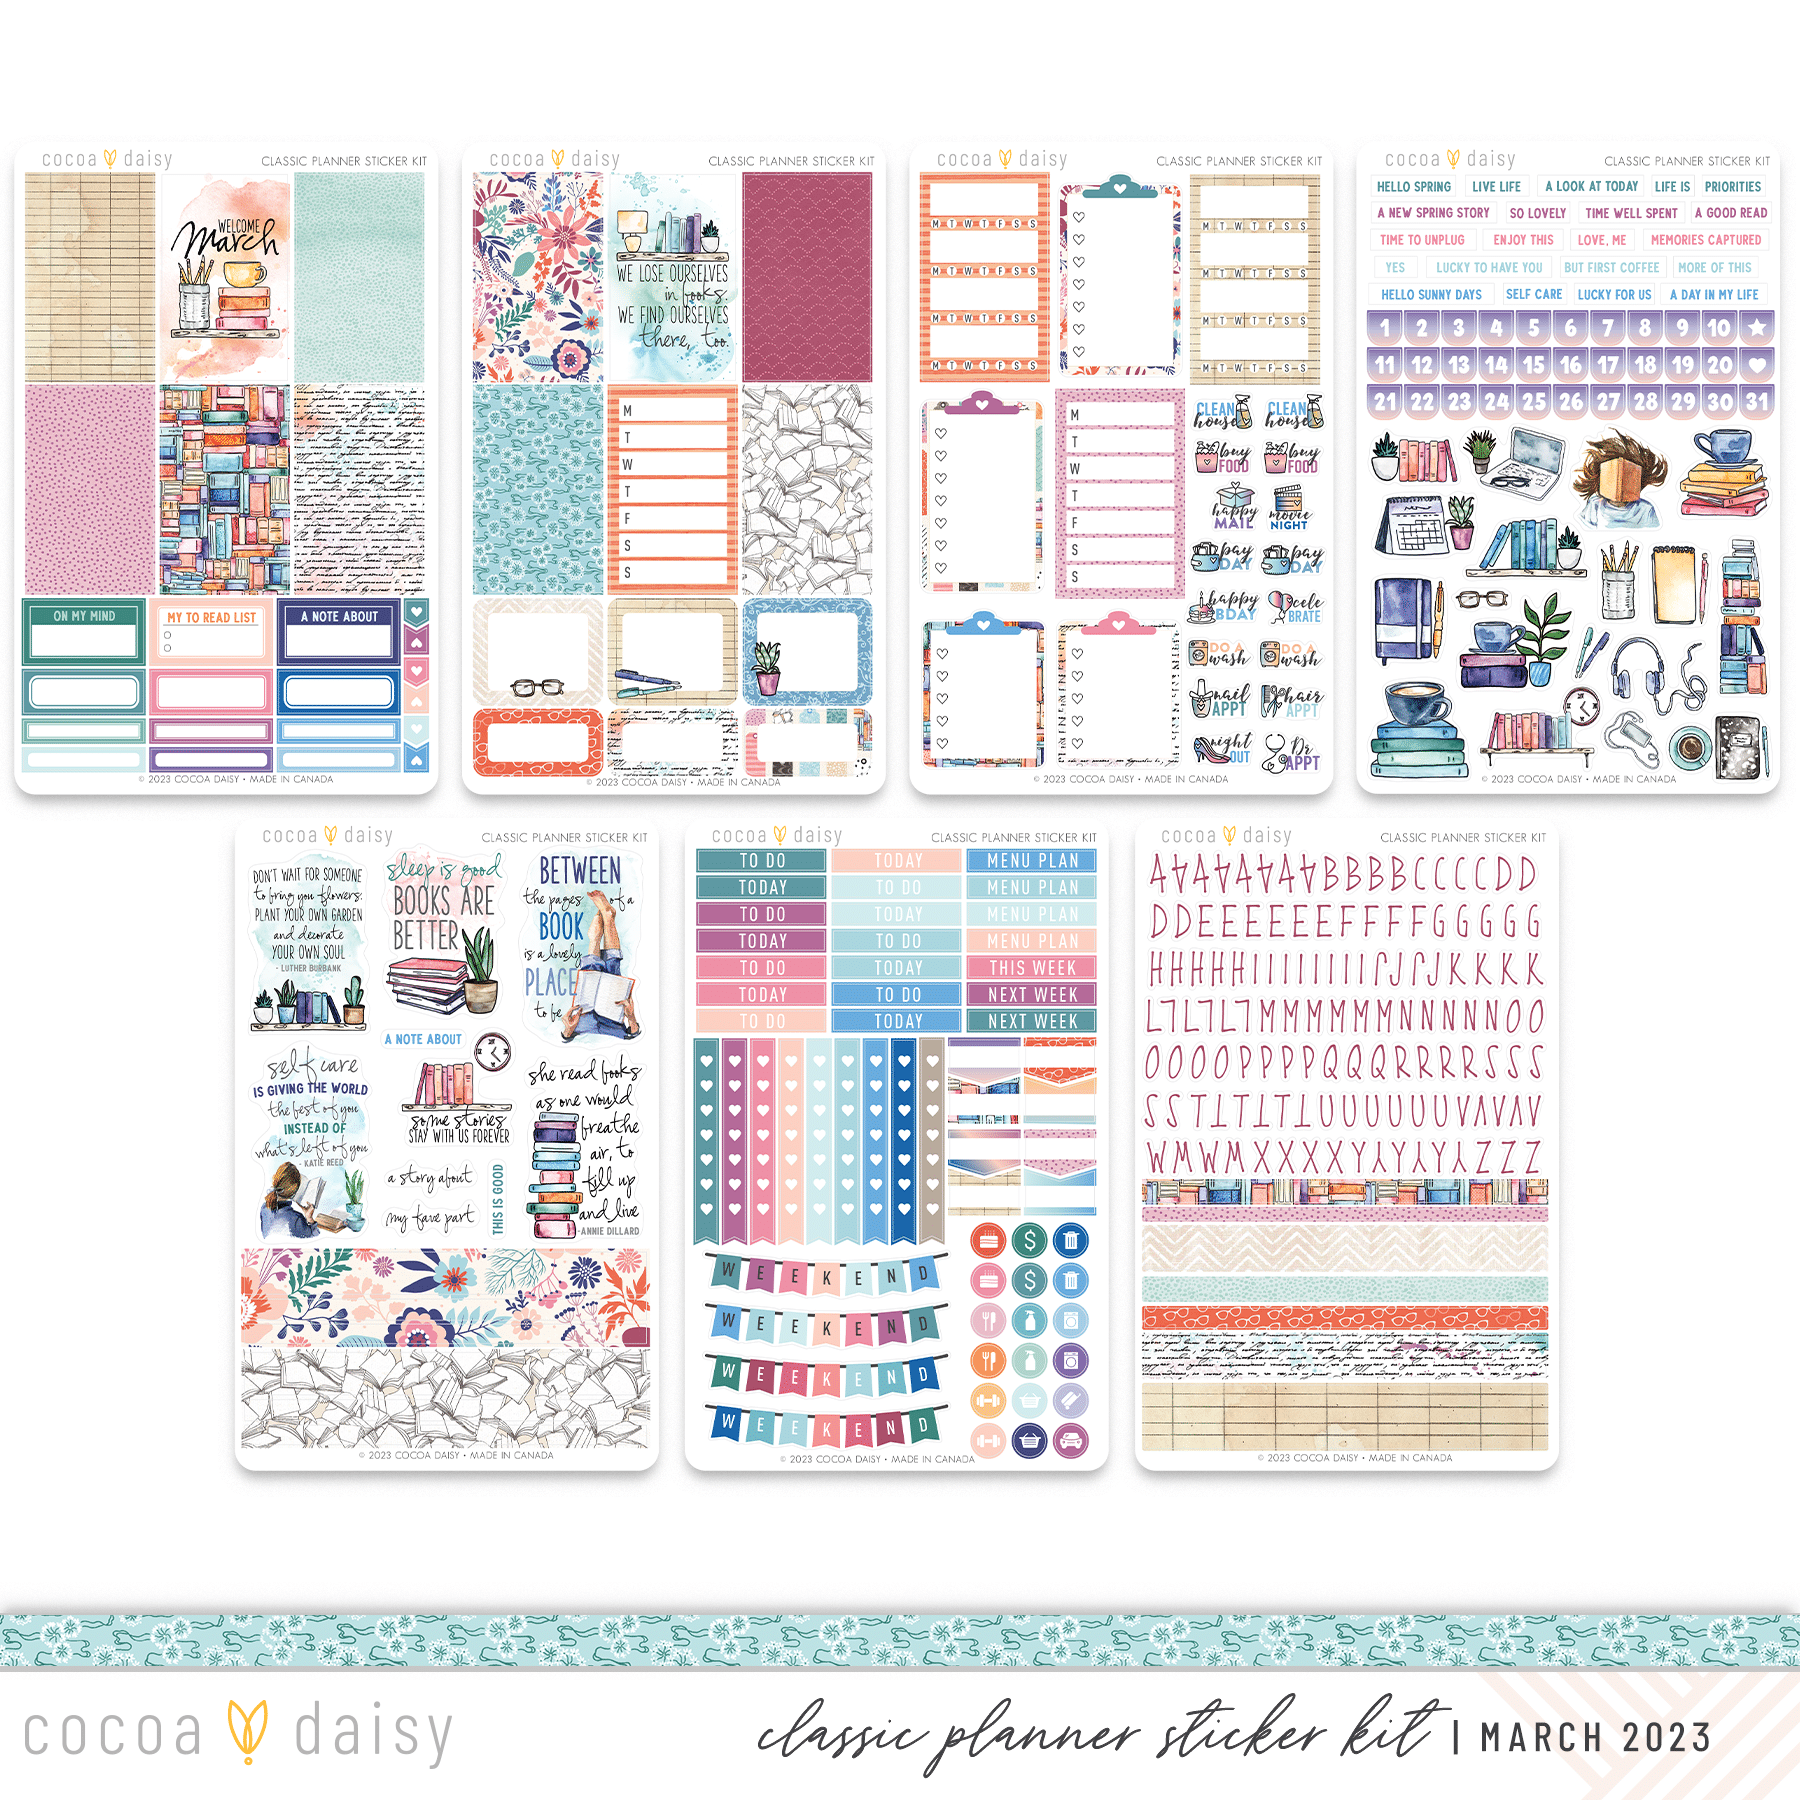 Bookish Daily Planner Stickers